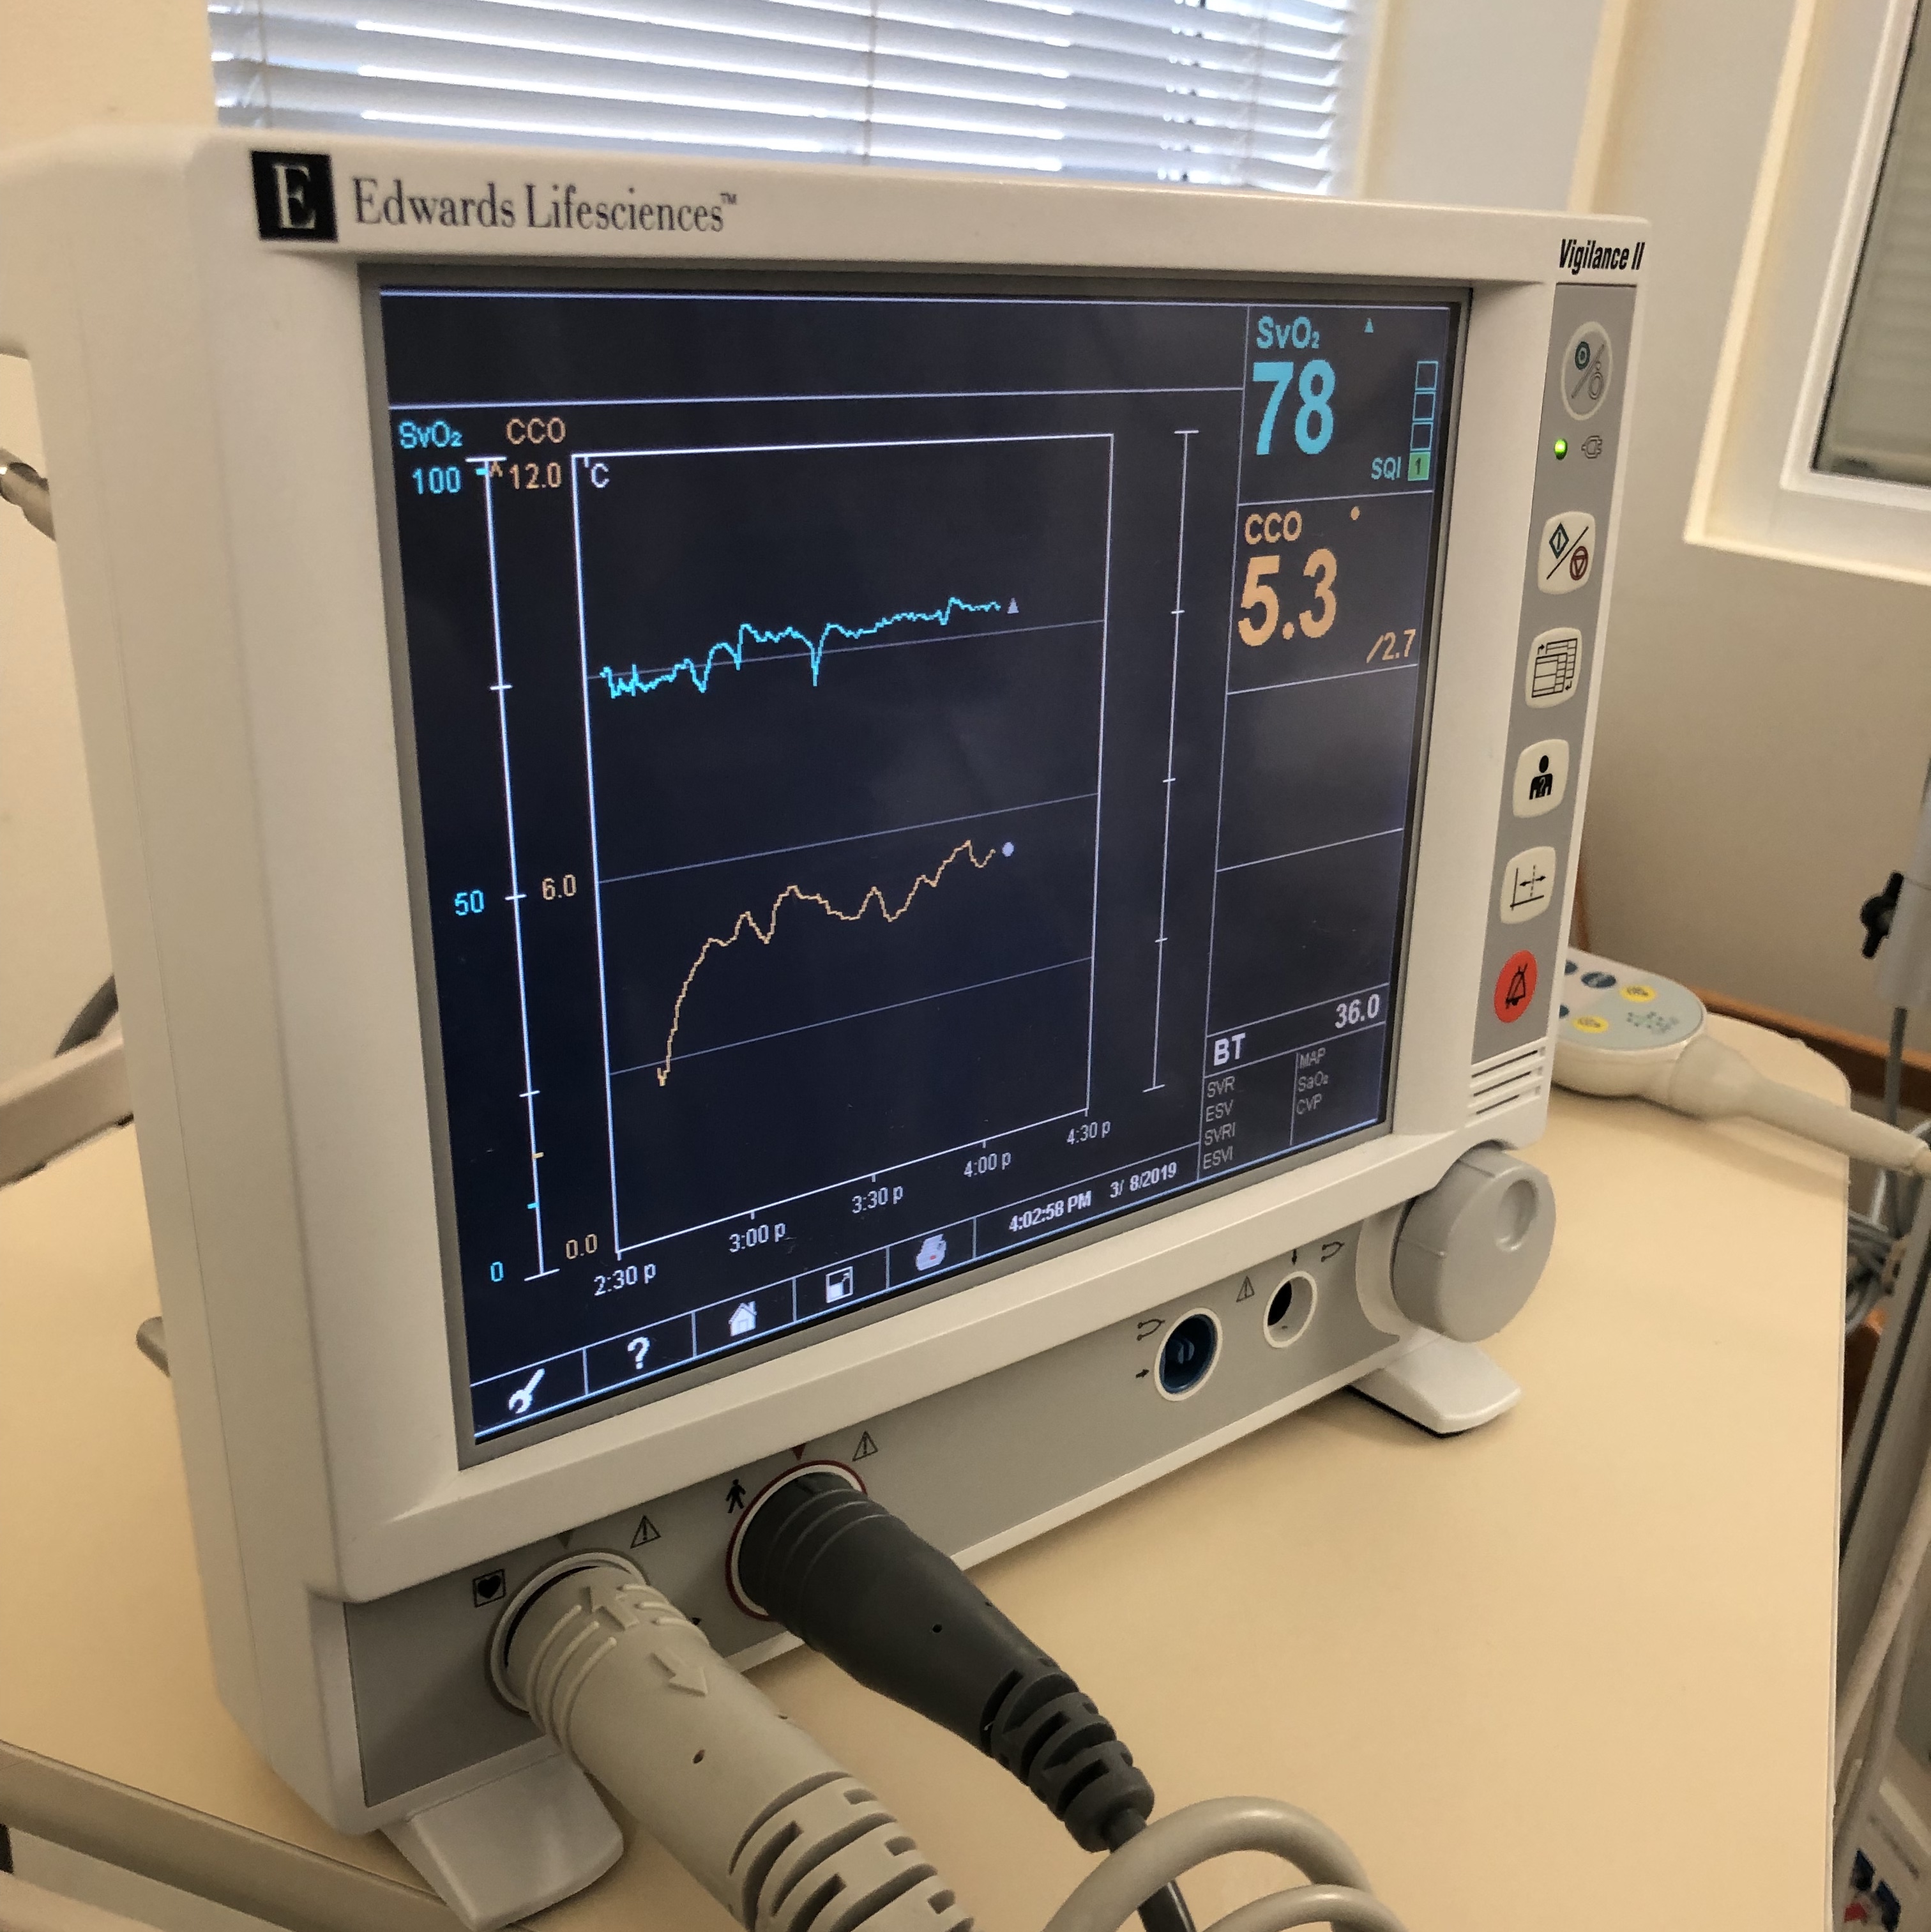 <p>Monitor&nbsp;Shows a Mixed Venous Oxygen Saturation Value